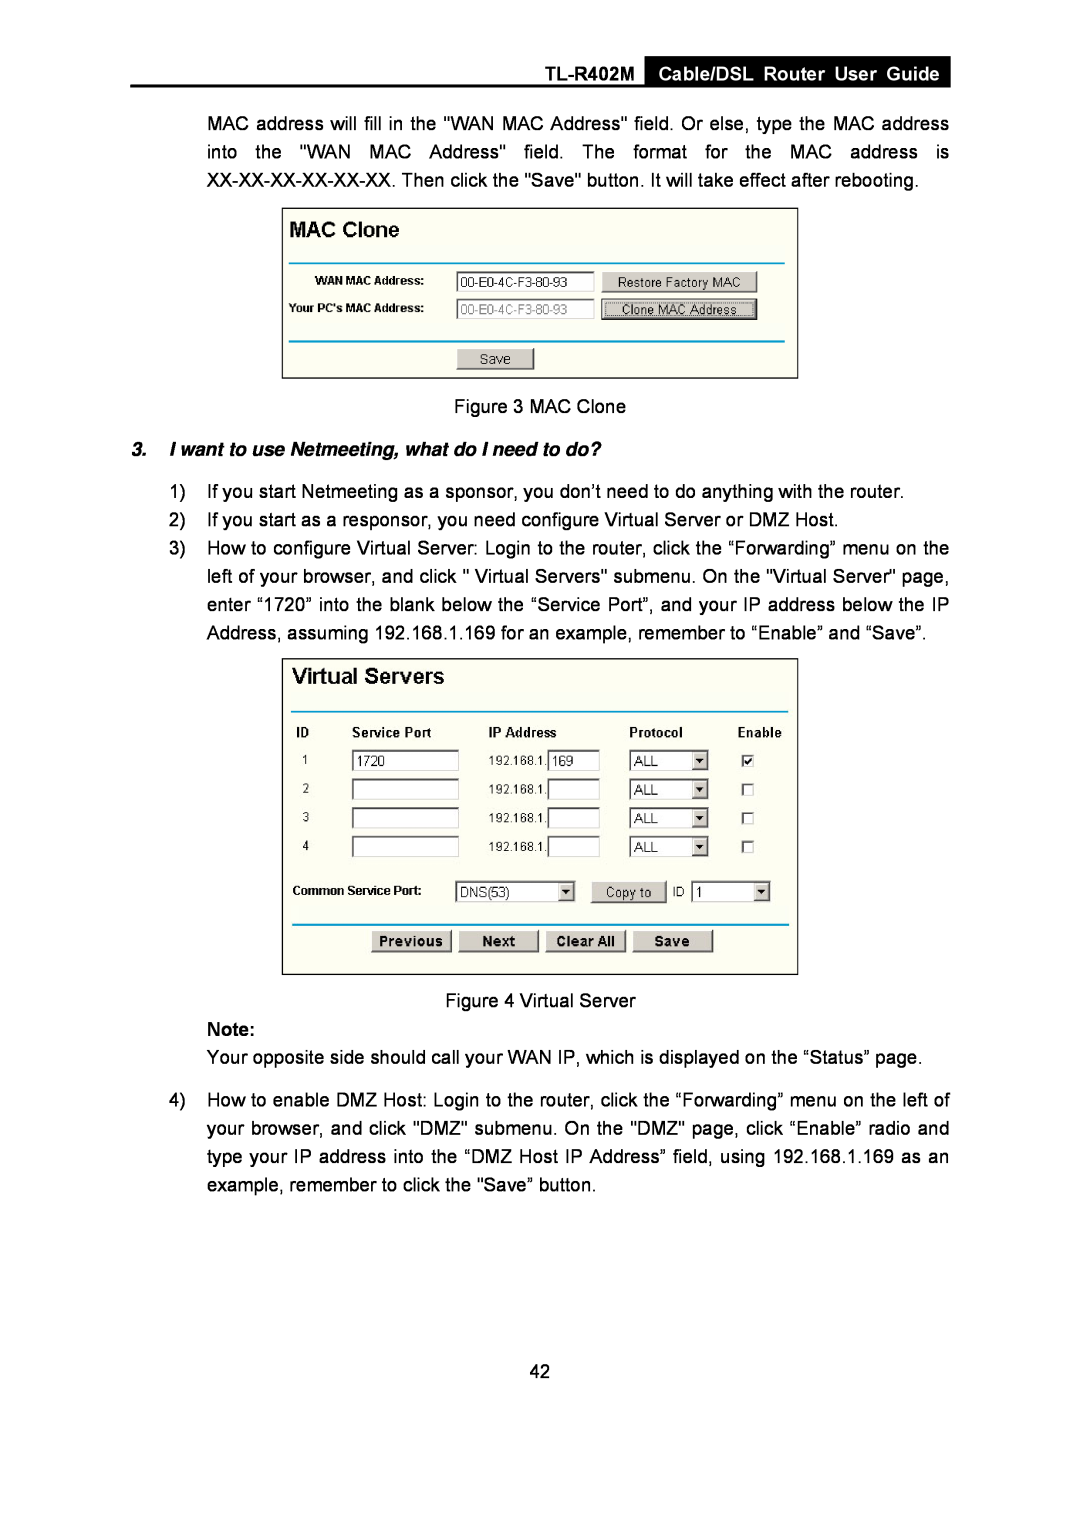 TP-Link manual TL-R402M Cable/DSL Router User Guide, I want to use Netmeeting, what do I need to do? 